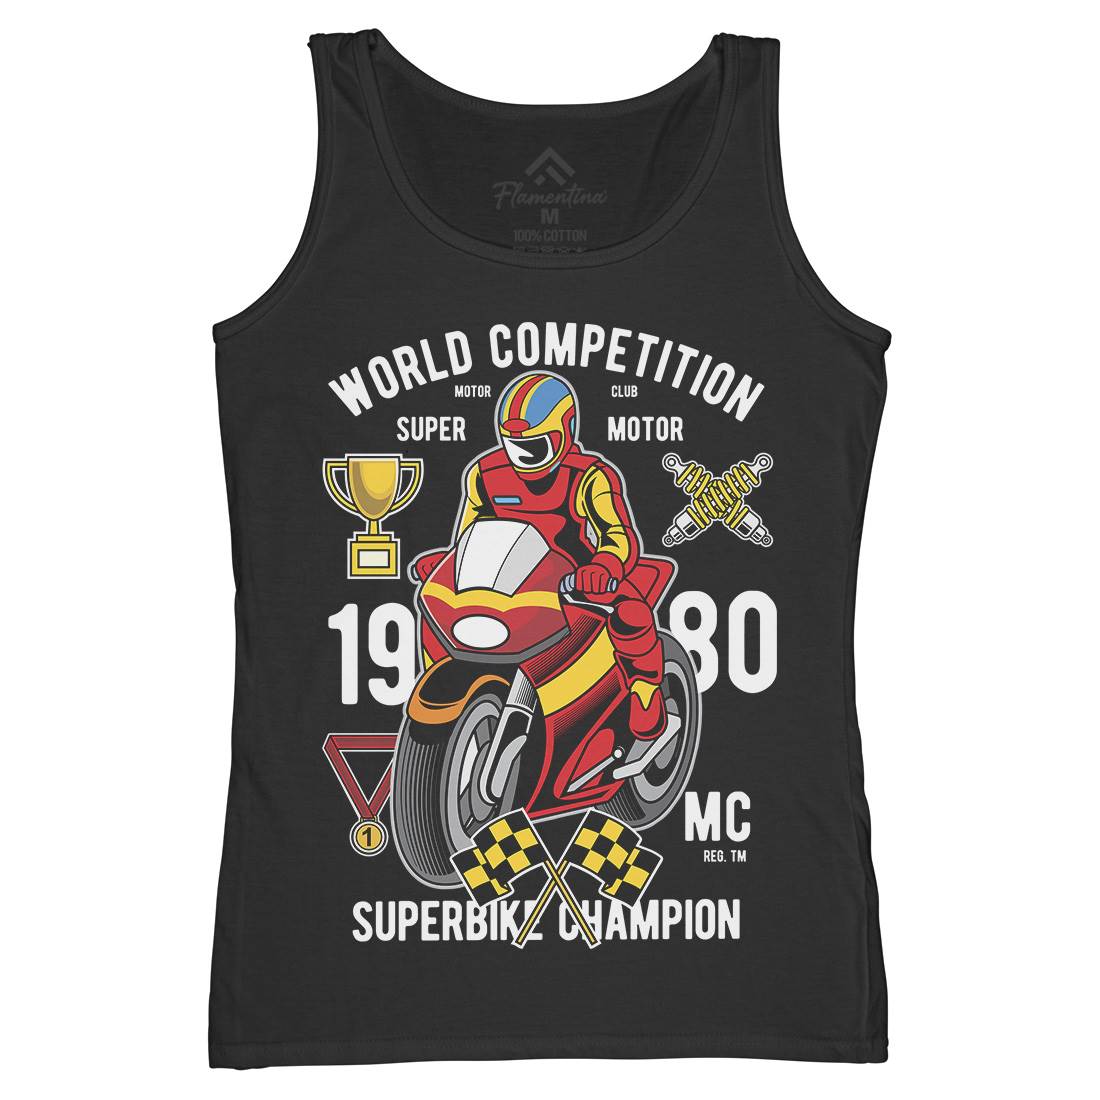 Super Bike World Competition Womens Organic Tank Top Vest Motorcycles C458